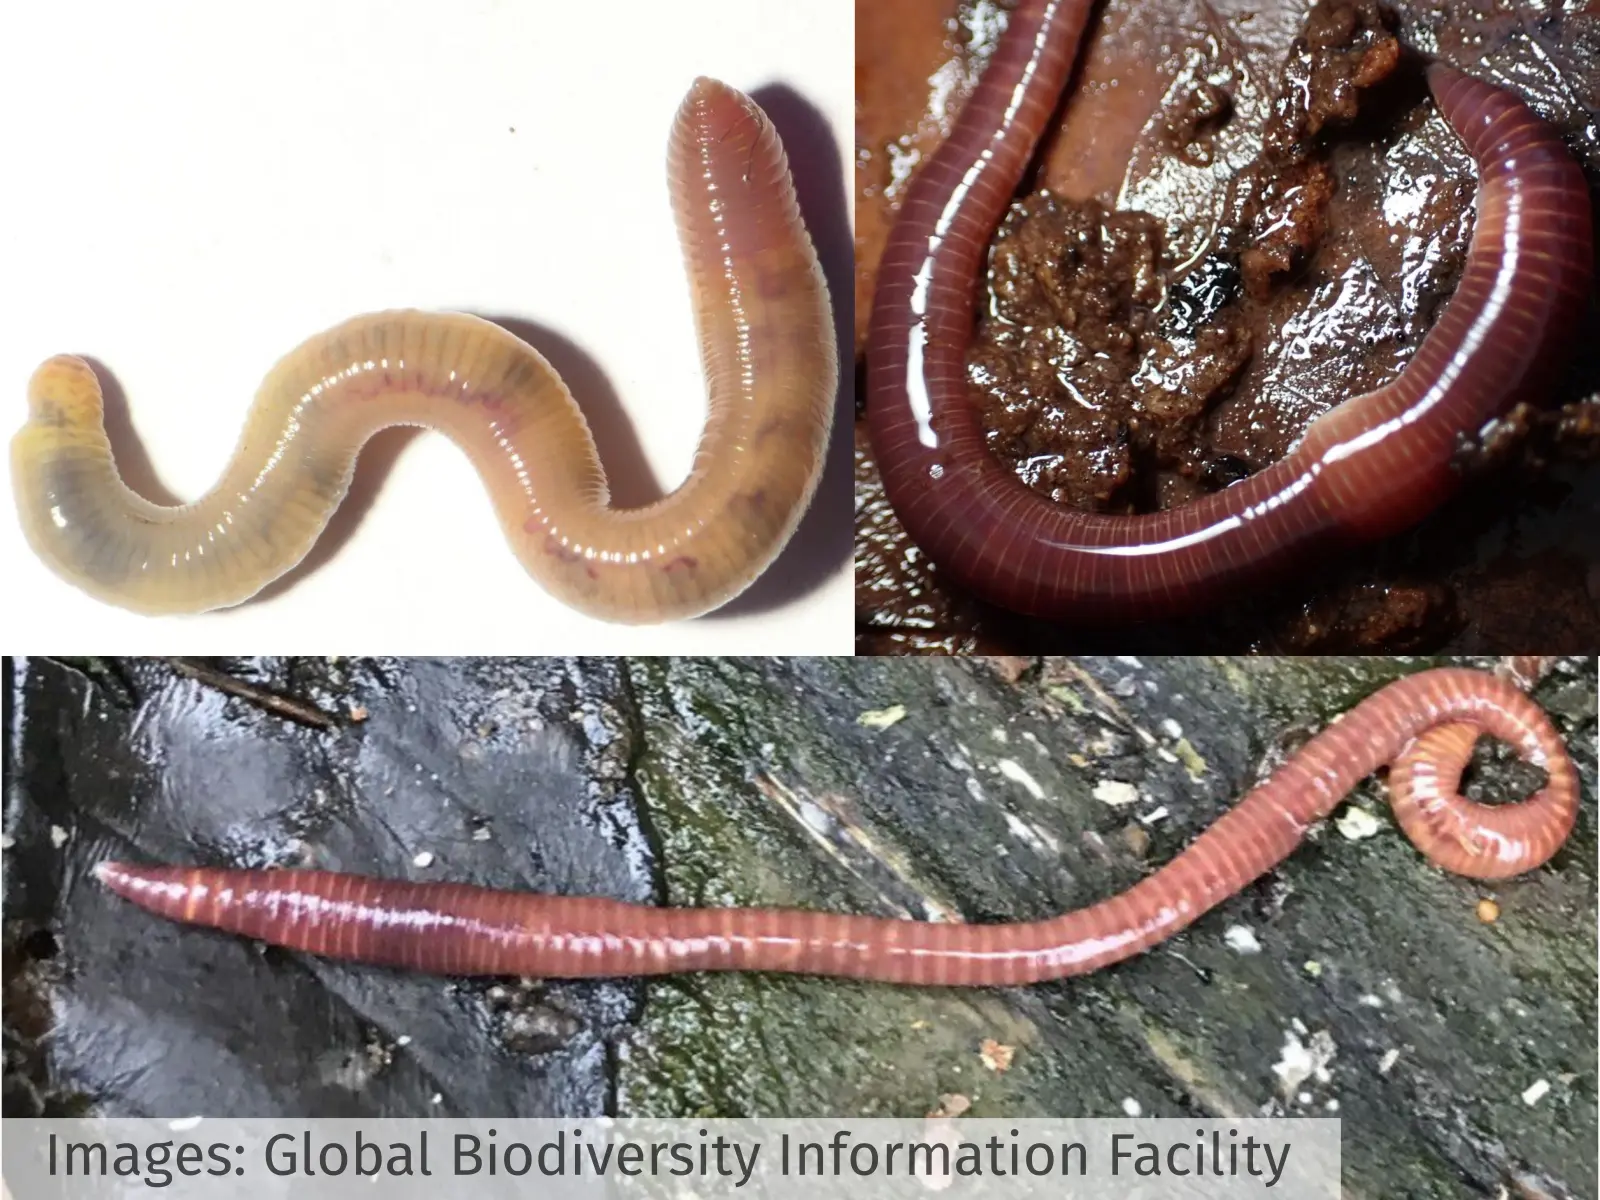 Custom Imaging Platform and Deep Learning to Identify and Phenotype Earthworms